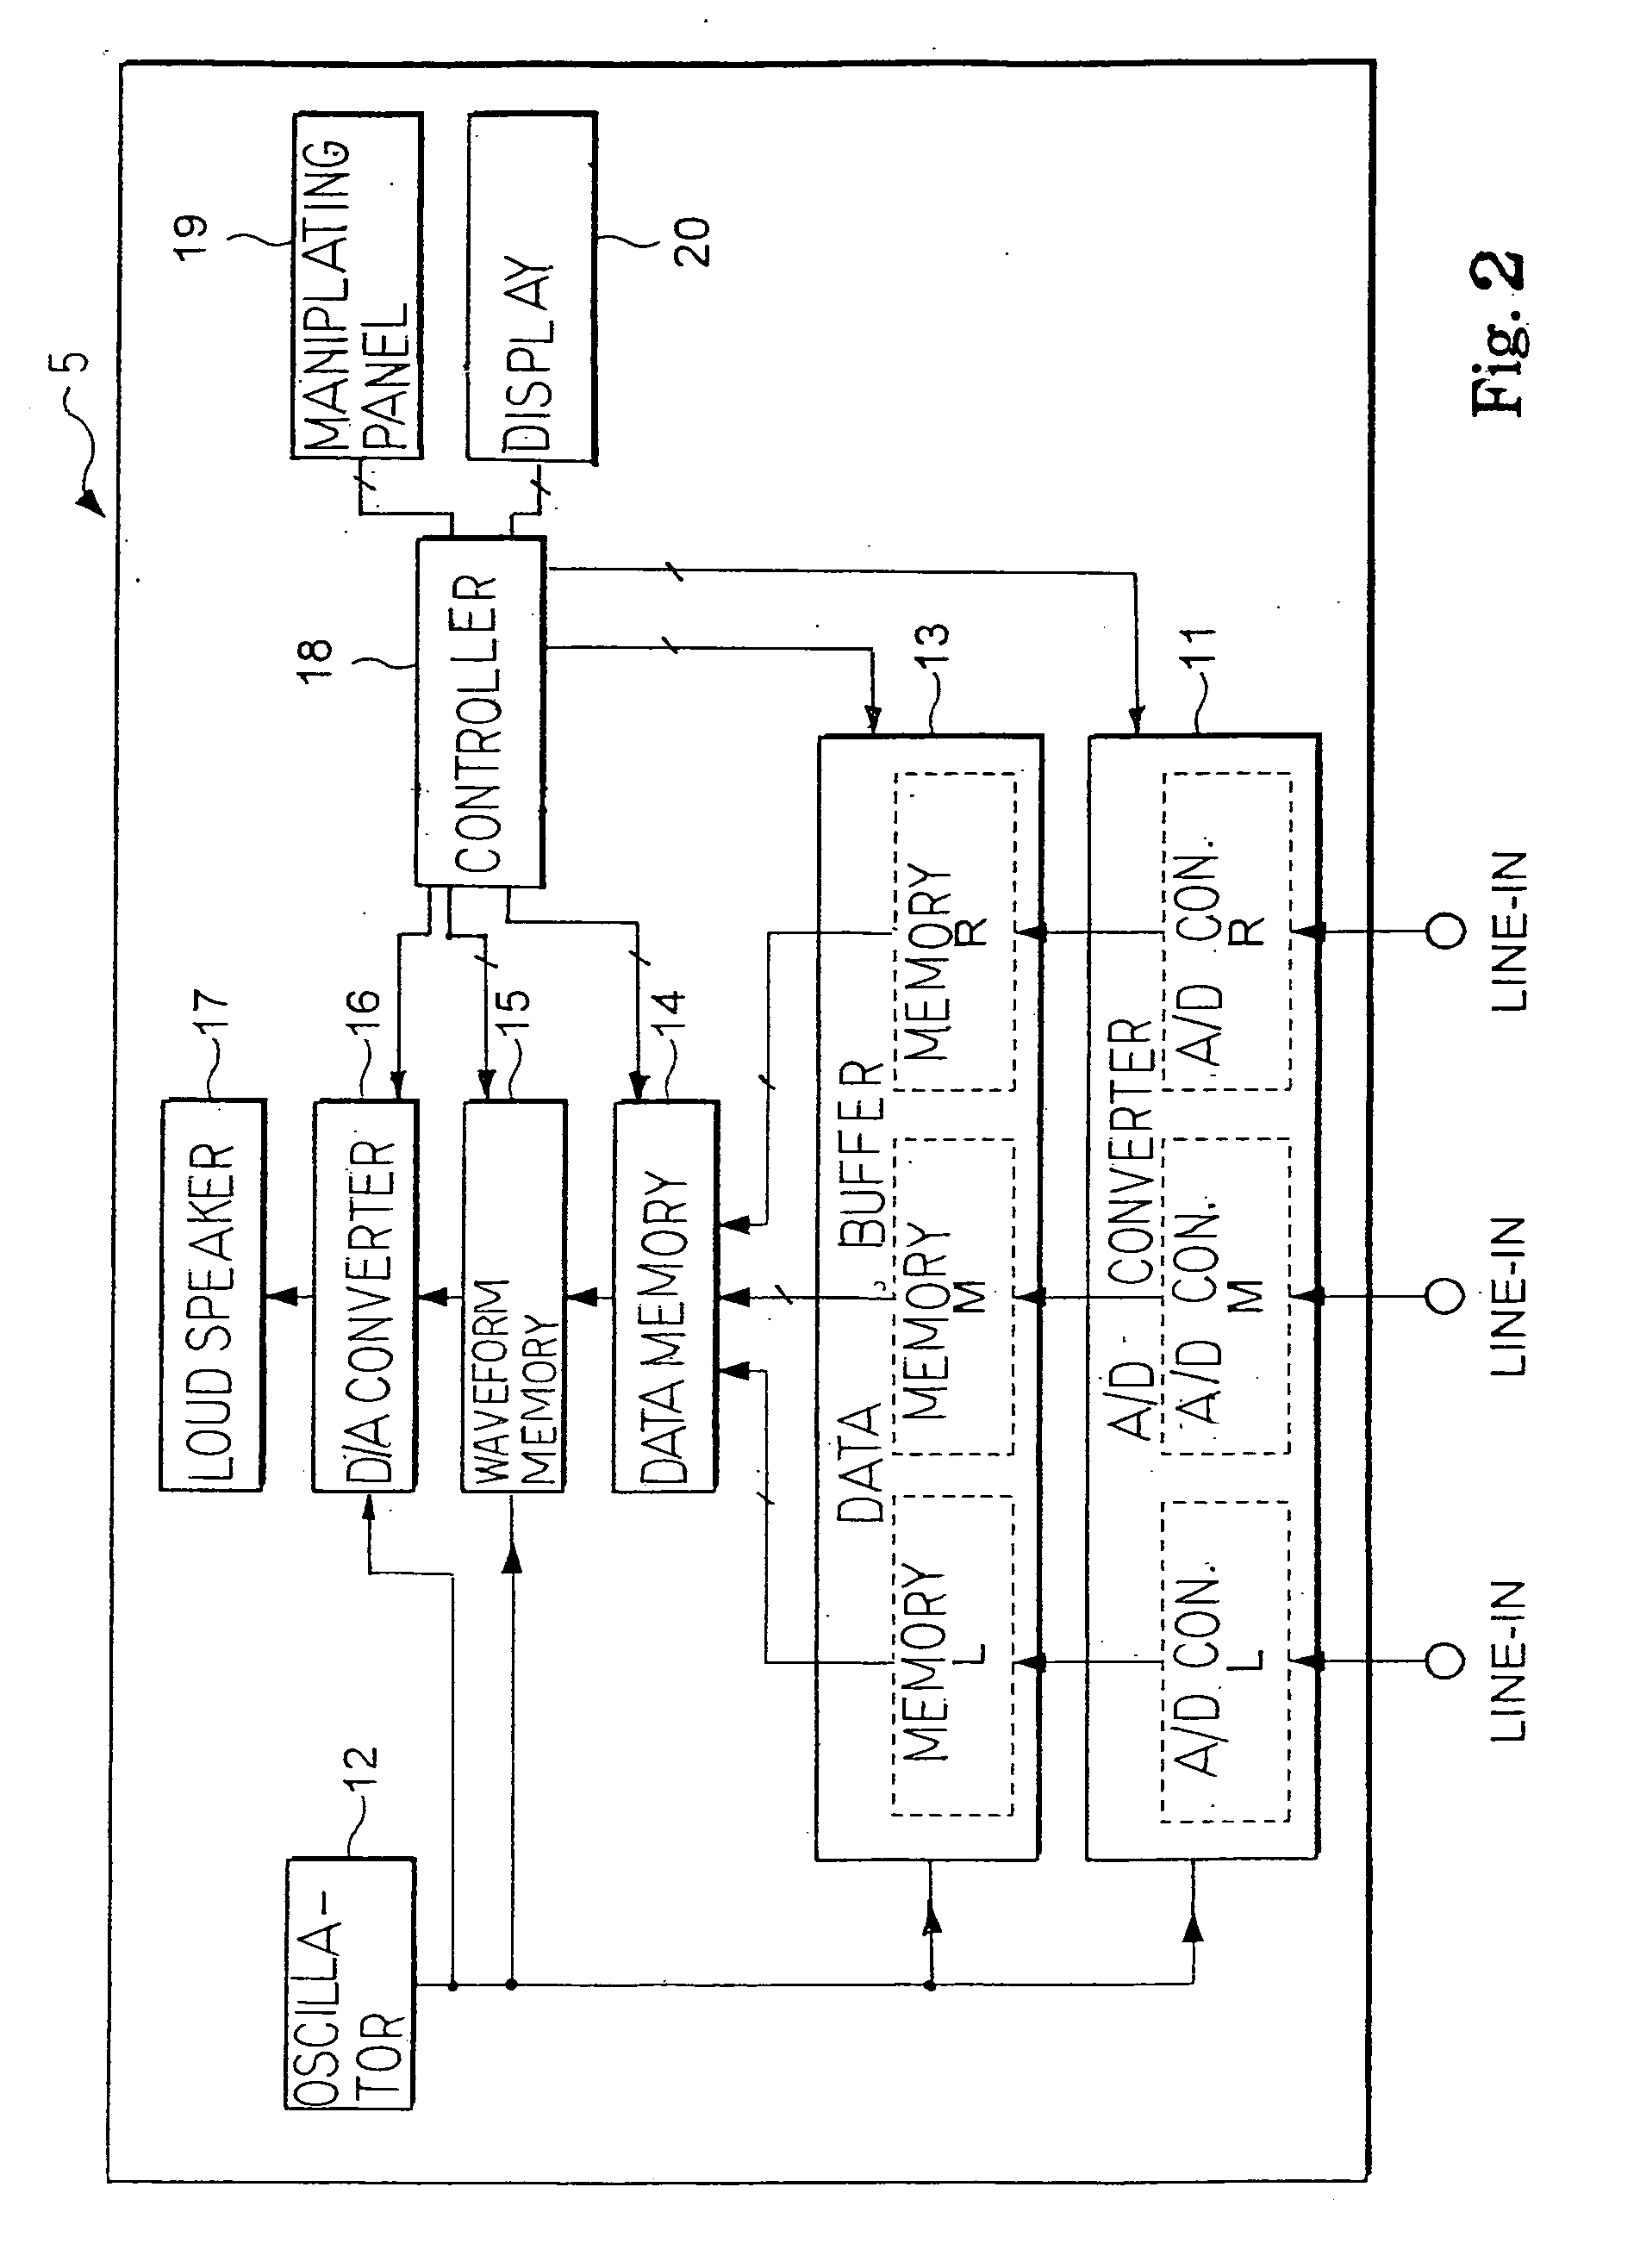 Method for making electronic tones close to acoustic tones, recording system